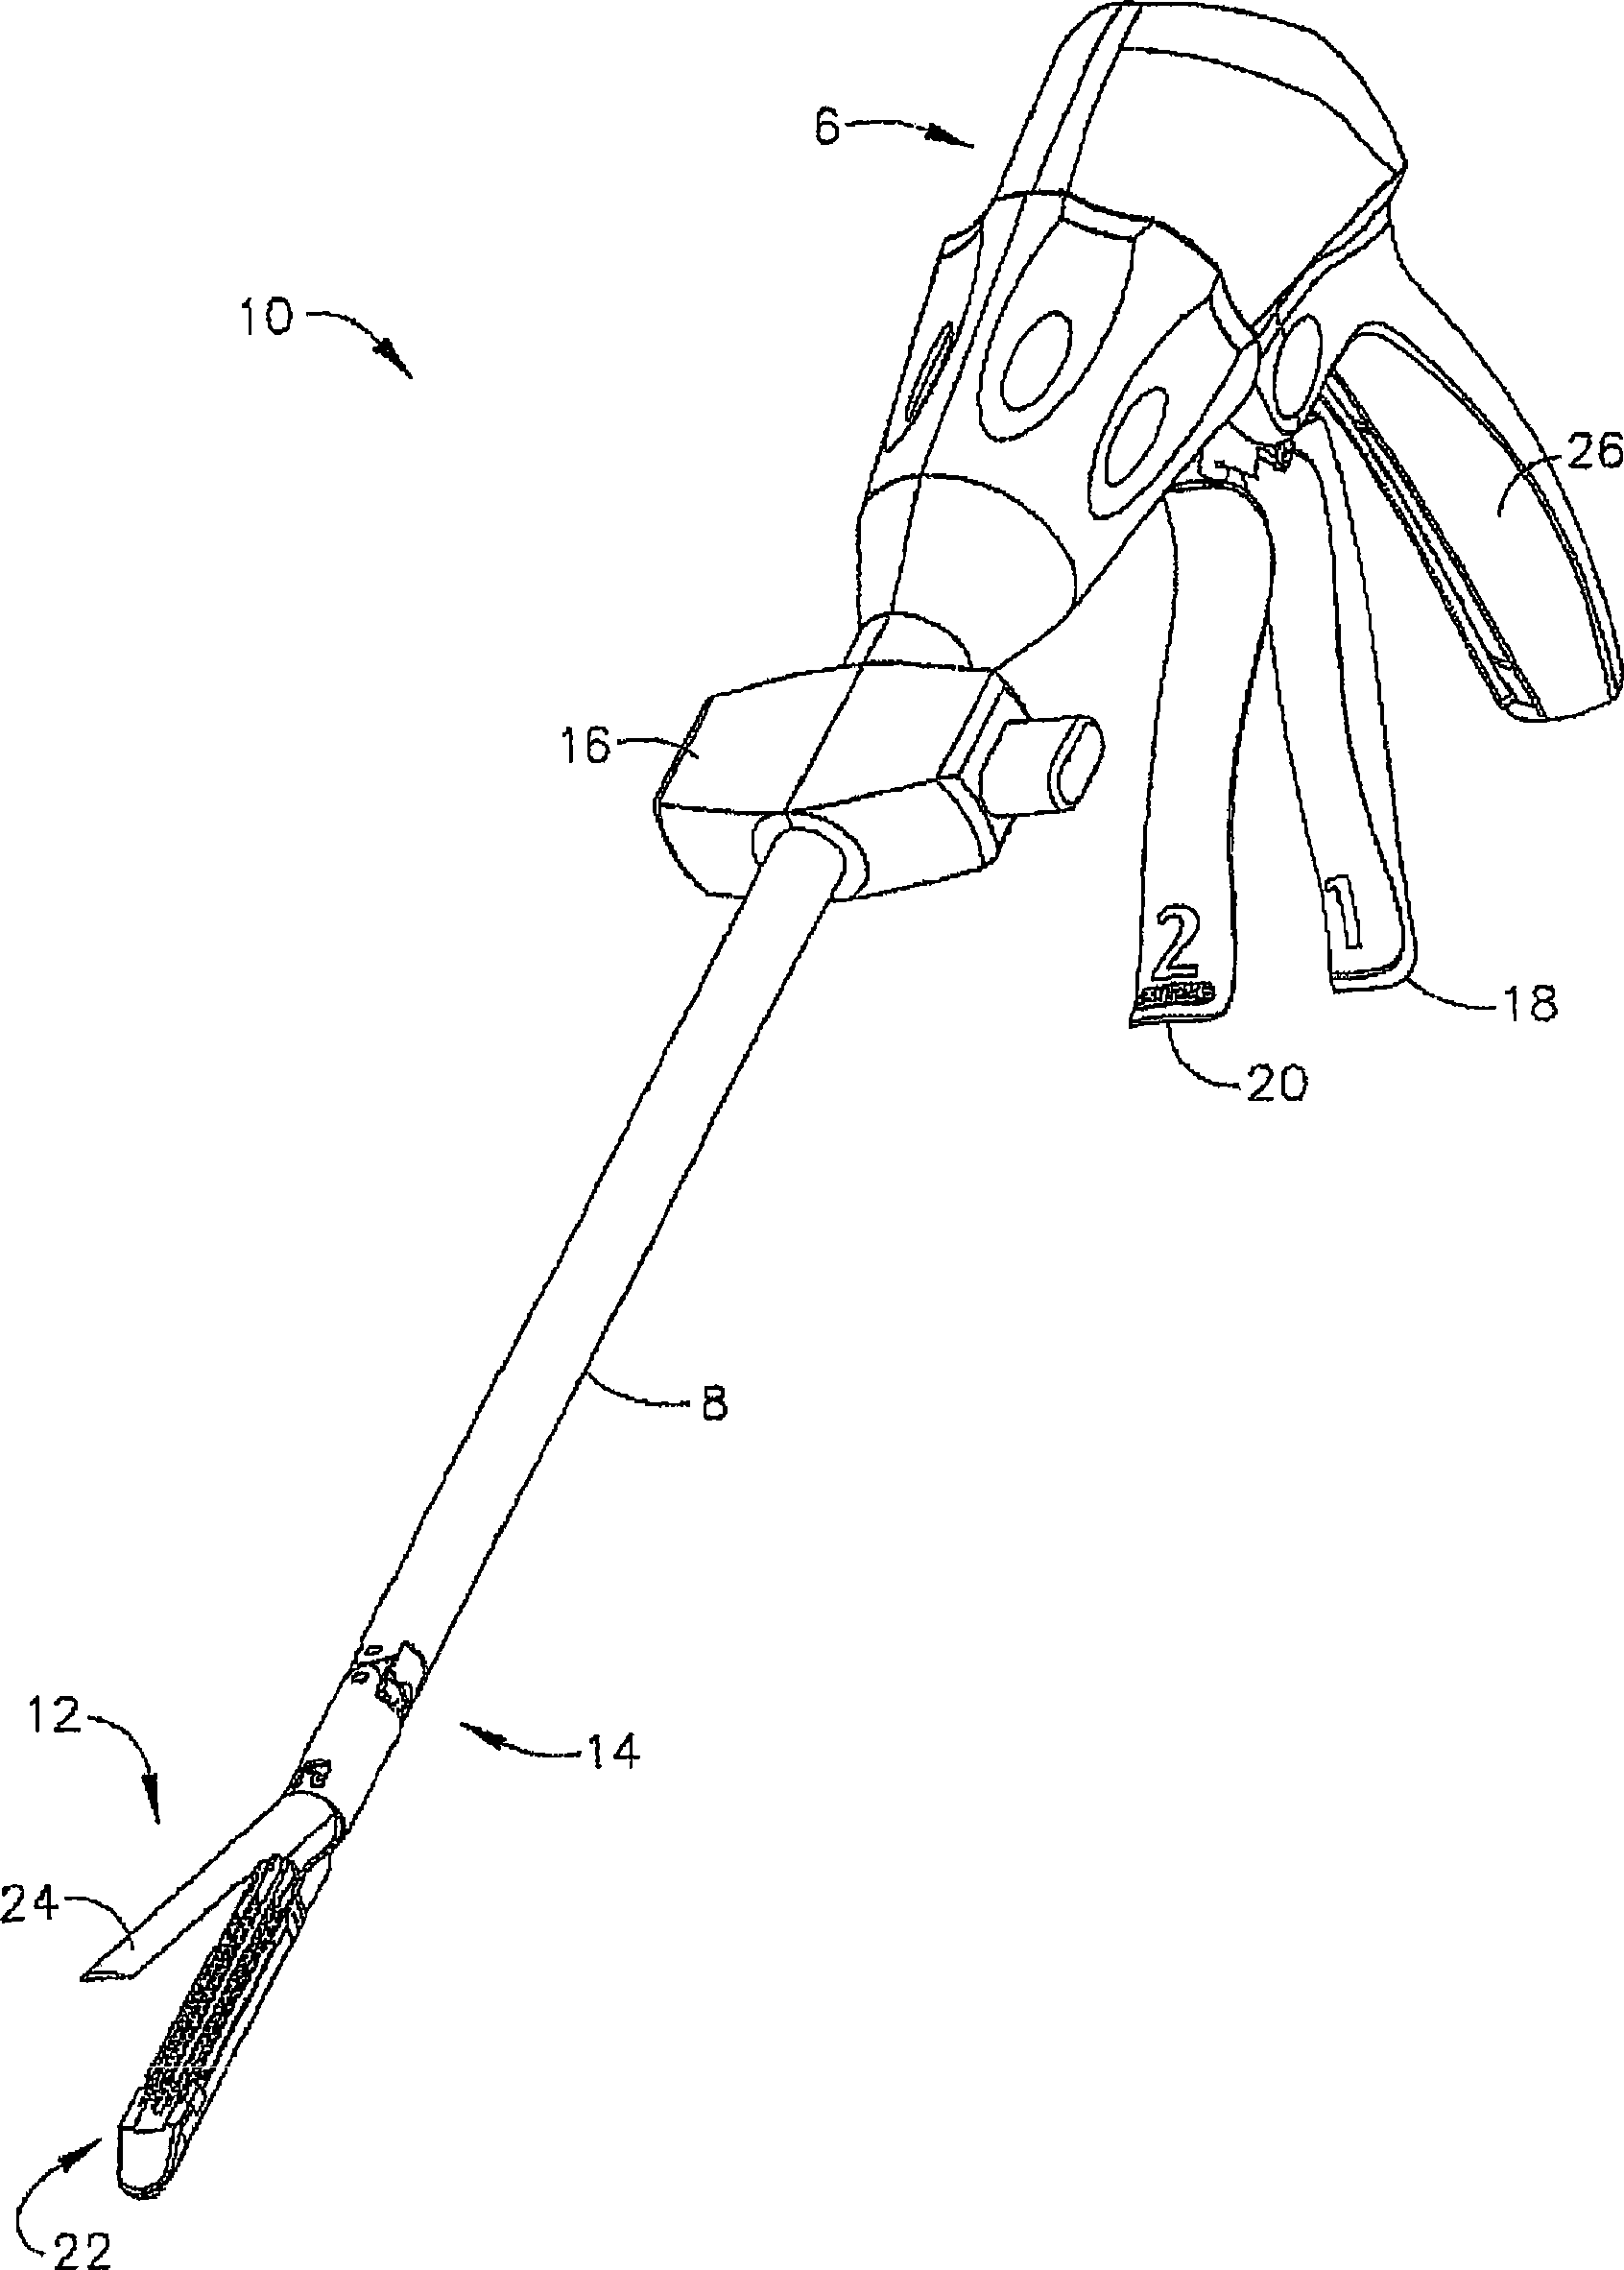 Surgical instrument with wireless communication between control unit and sensor transponders